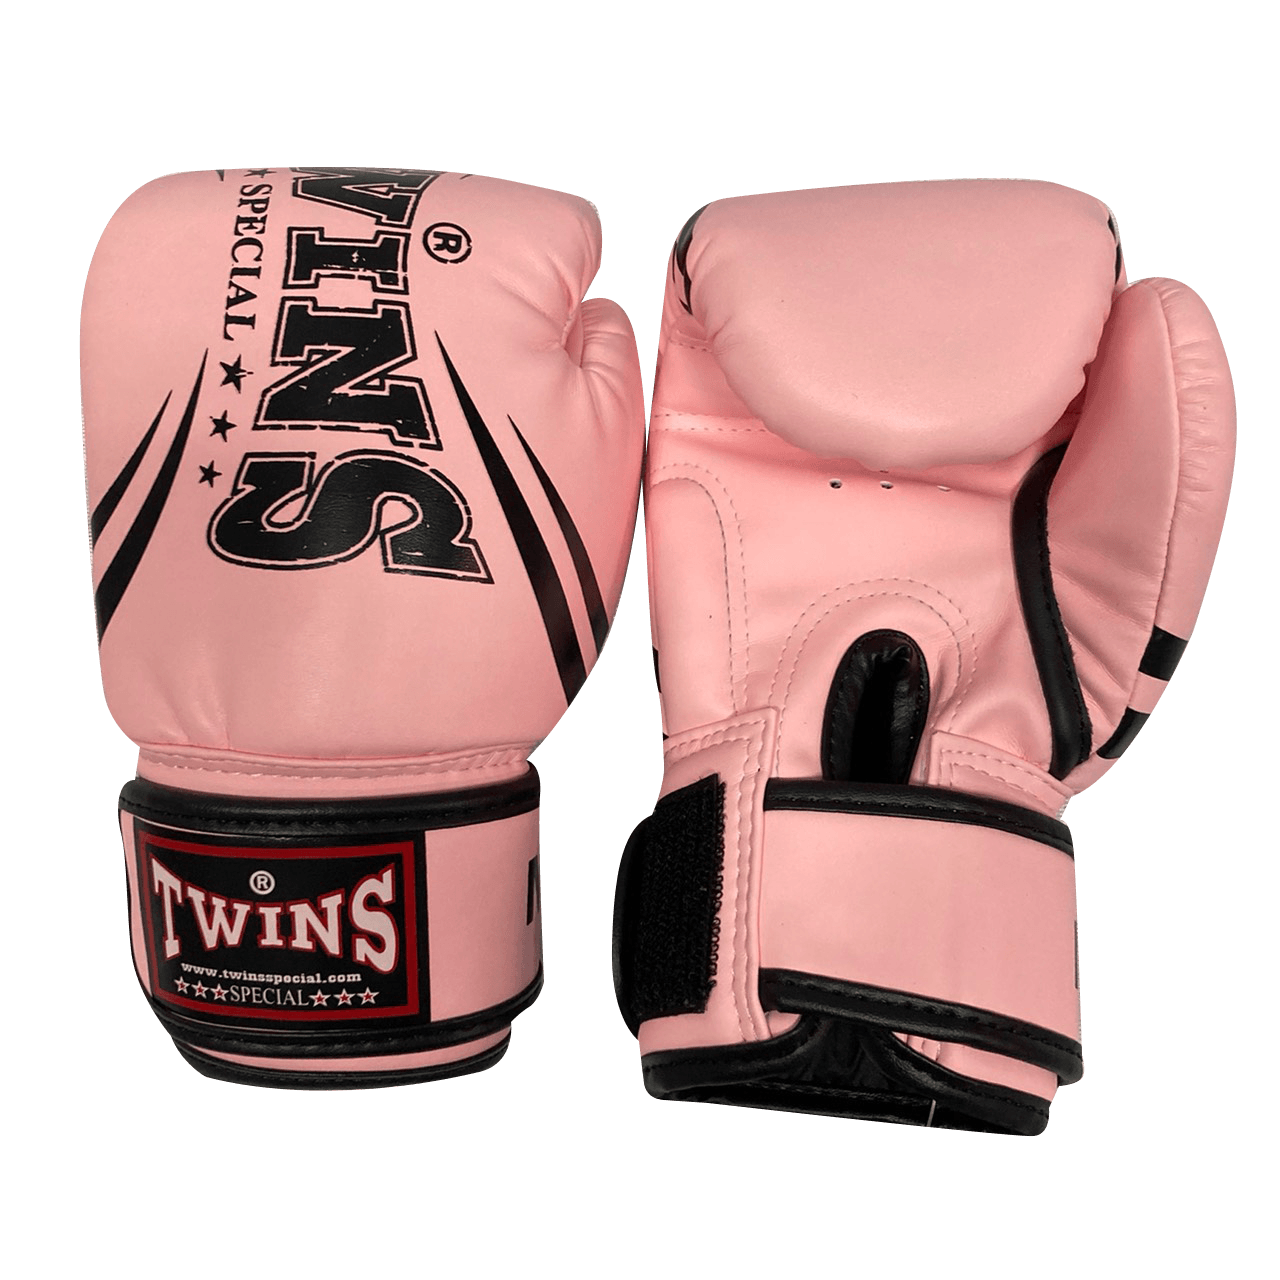 Twins Special Boxing Gloves KIDS FBGVSD3-TW6 Light Pink Black